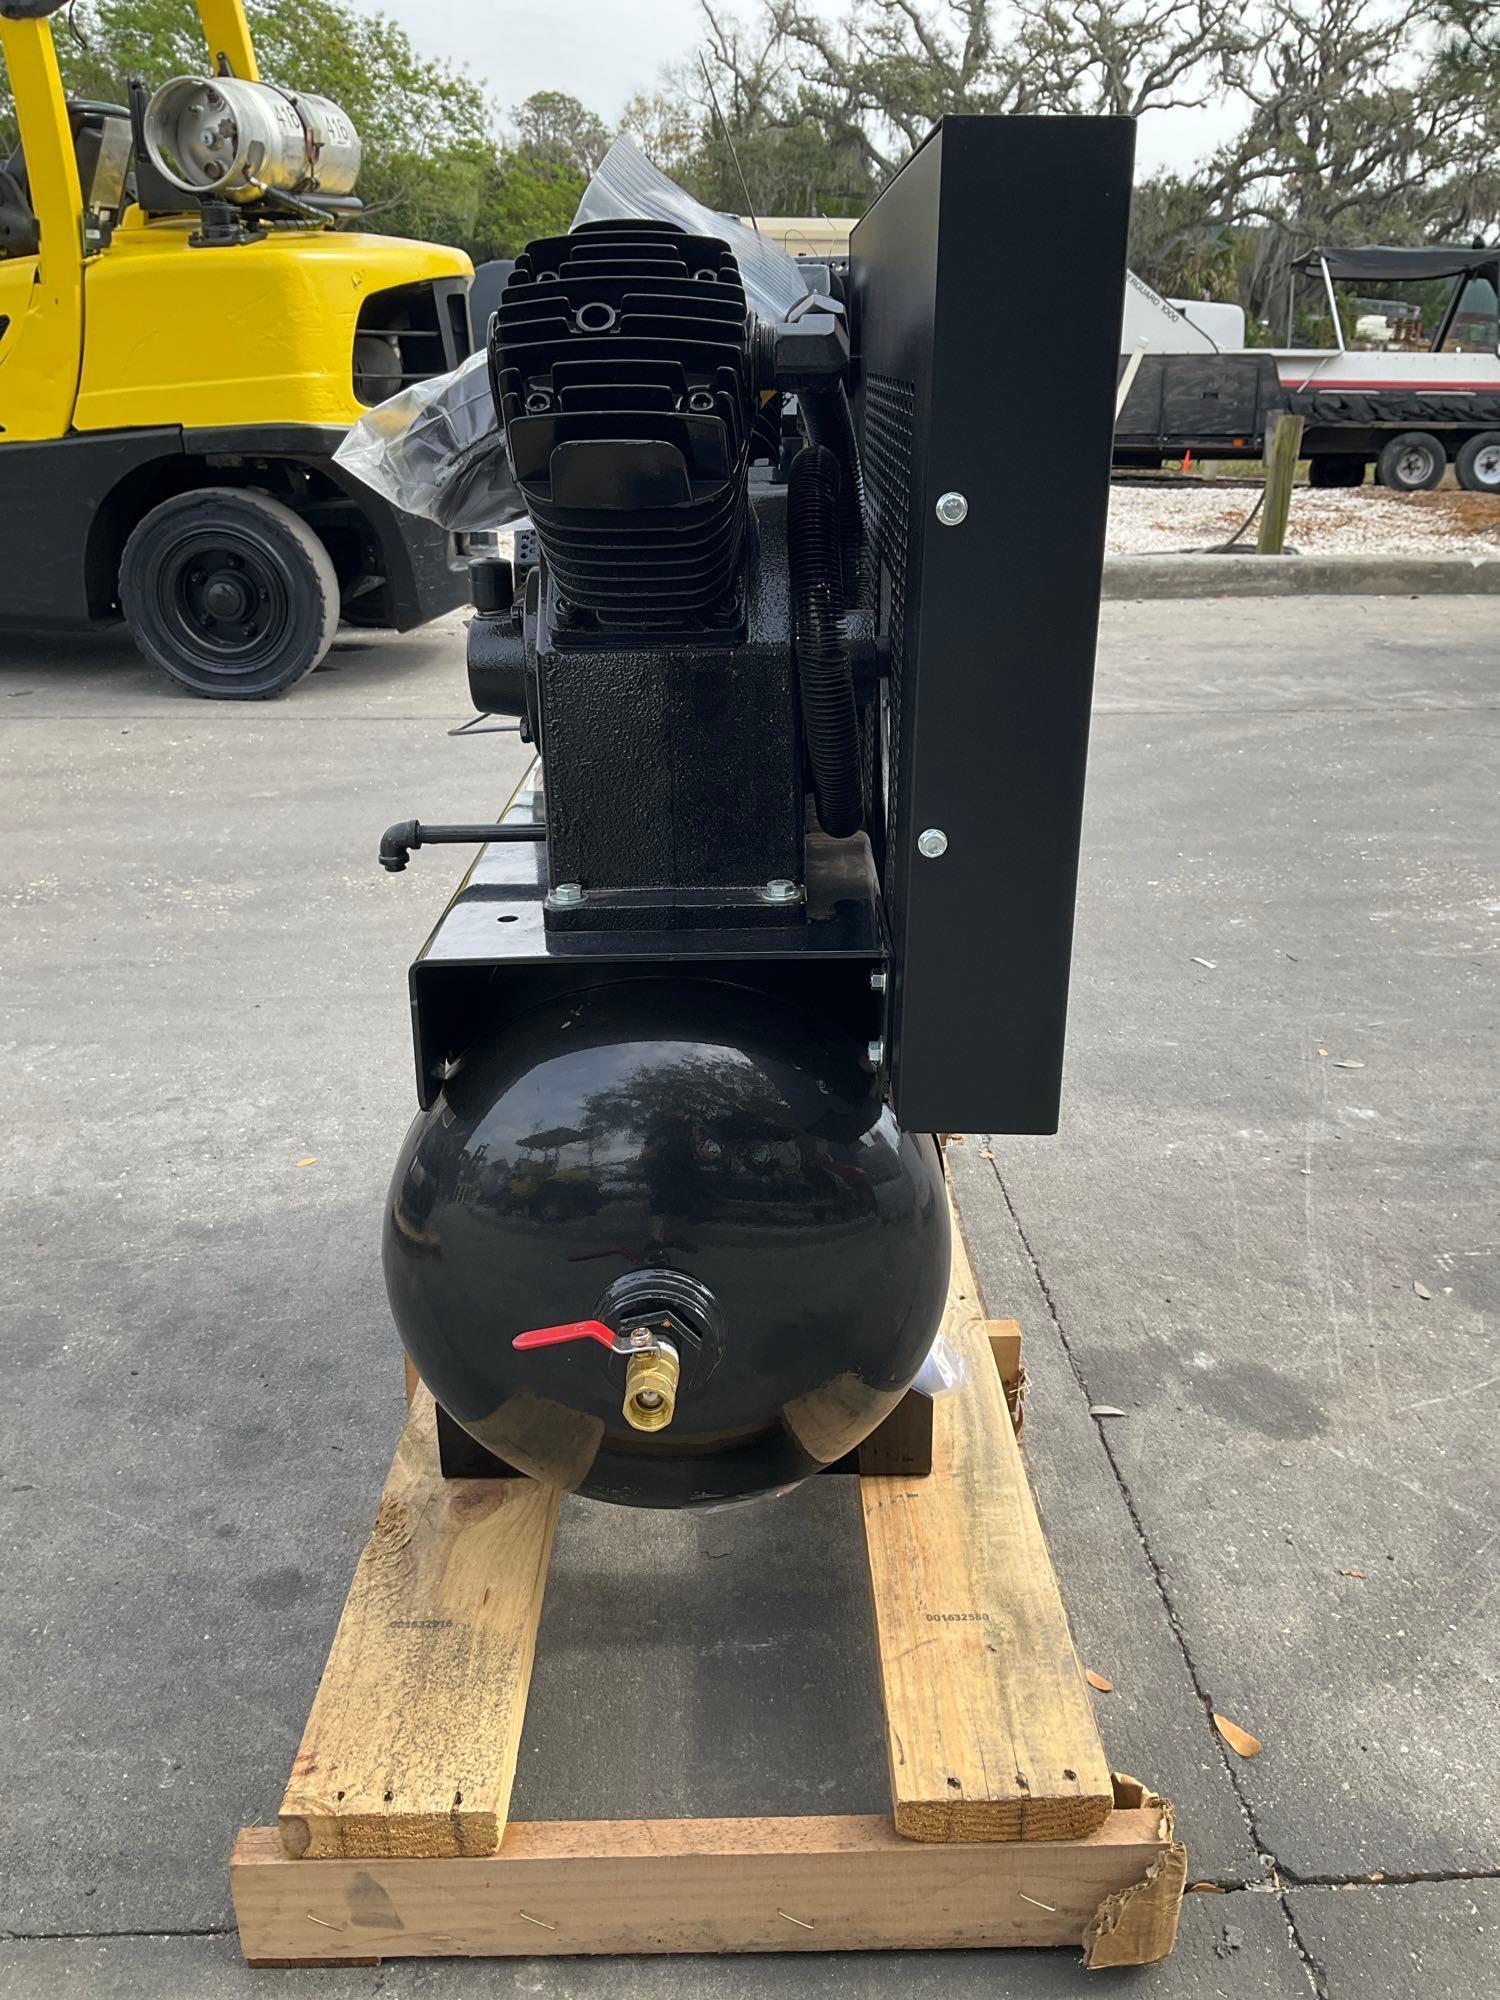 UNUSED POWER TRAIN AIR COMPRESSOR MODEL PT-14G30TRKE-V2, GAS POWERED, APPROX 175 MAX RATED PSI, A...